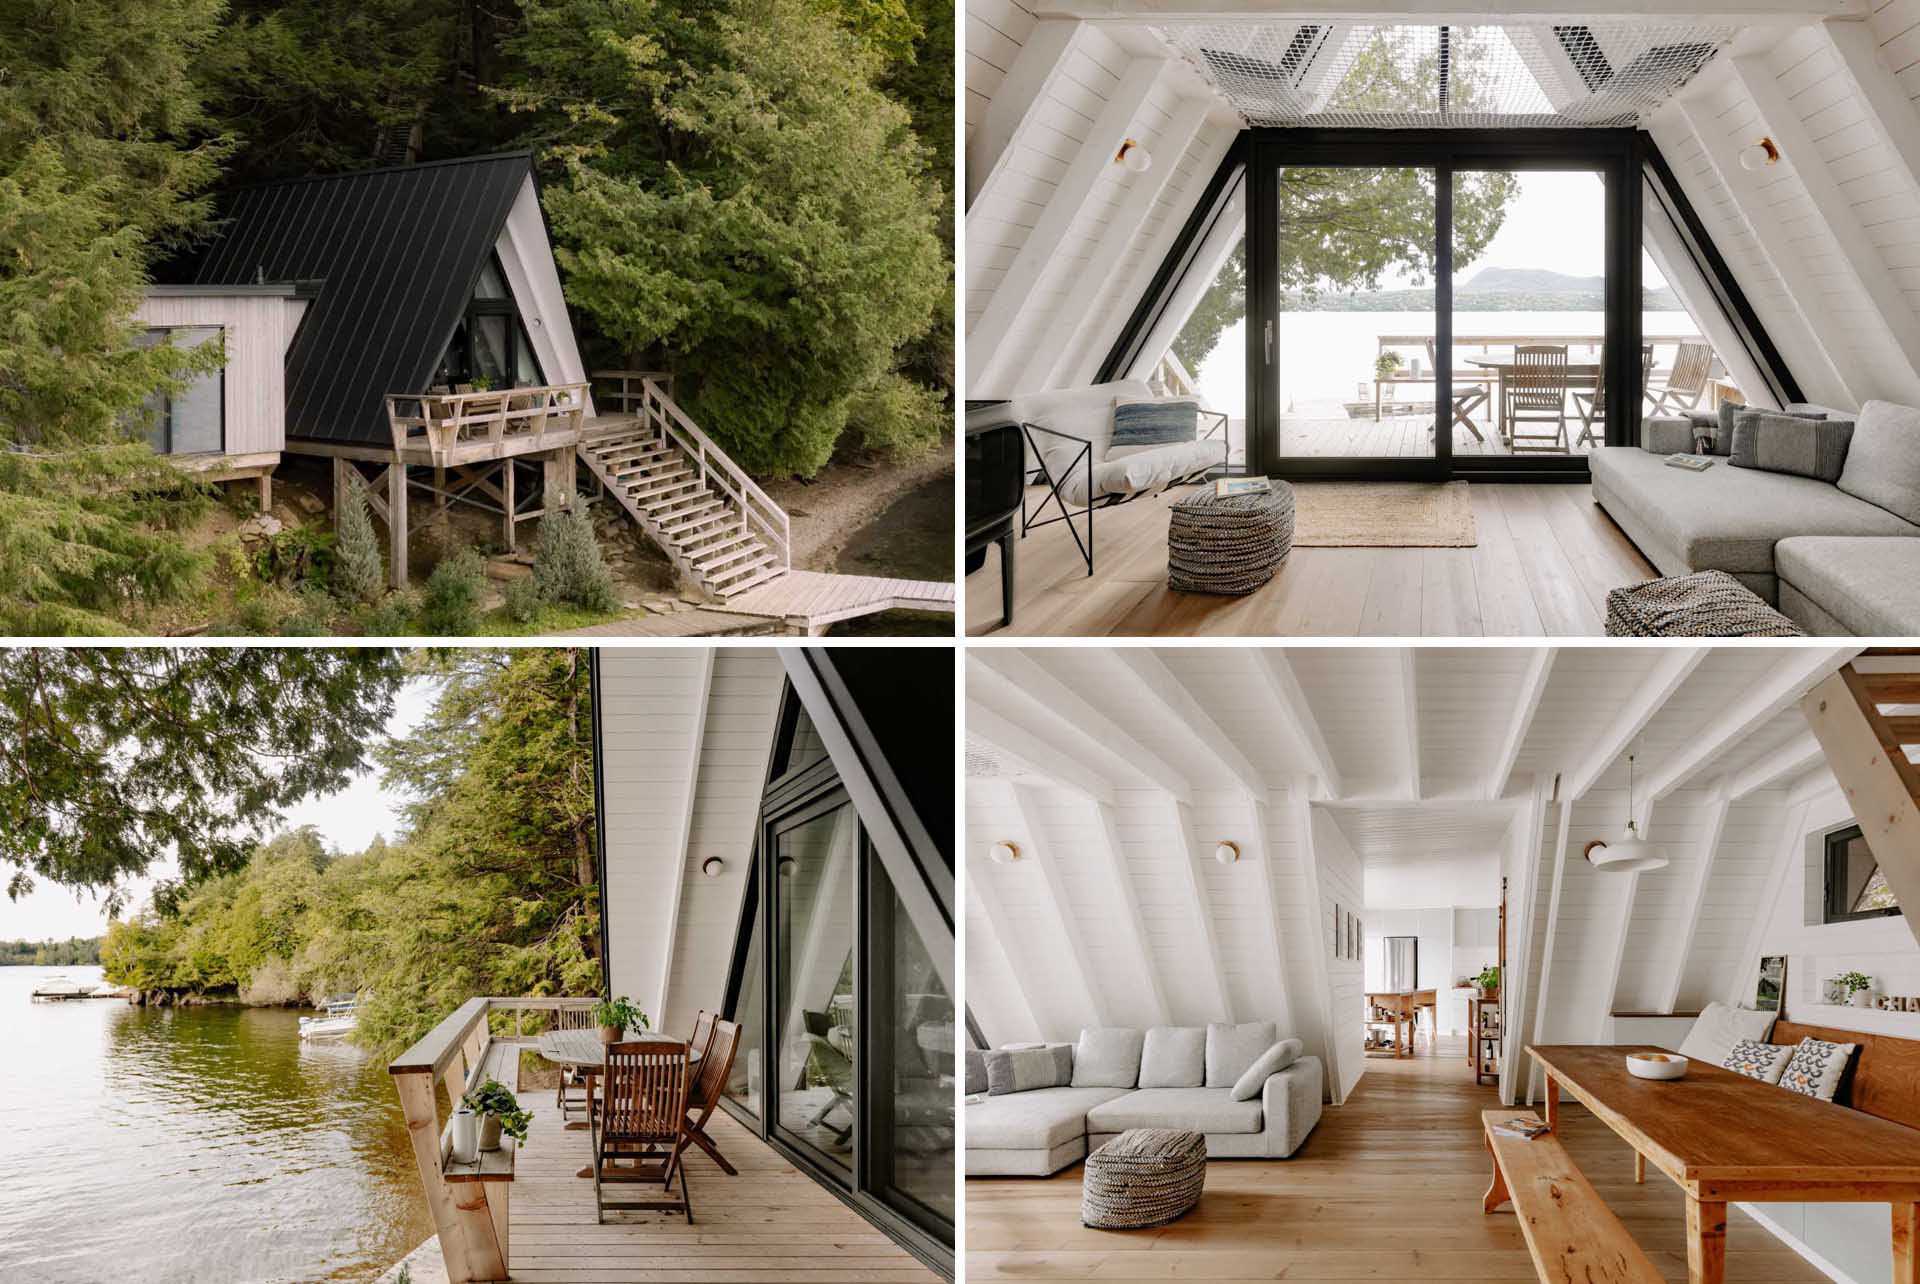 An A-Frame cabin with dark exterior and white interior.